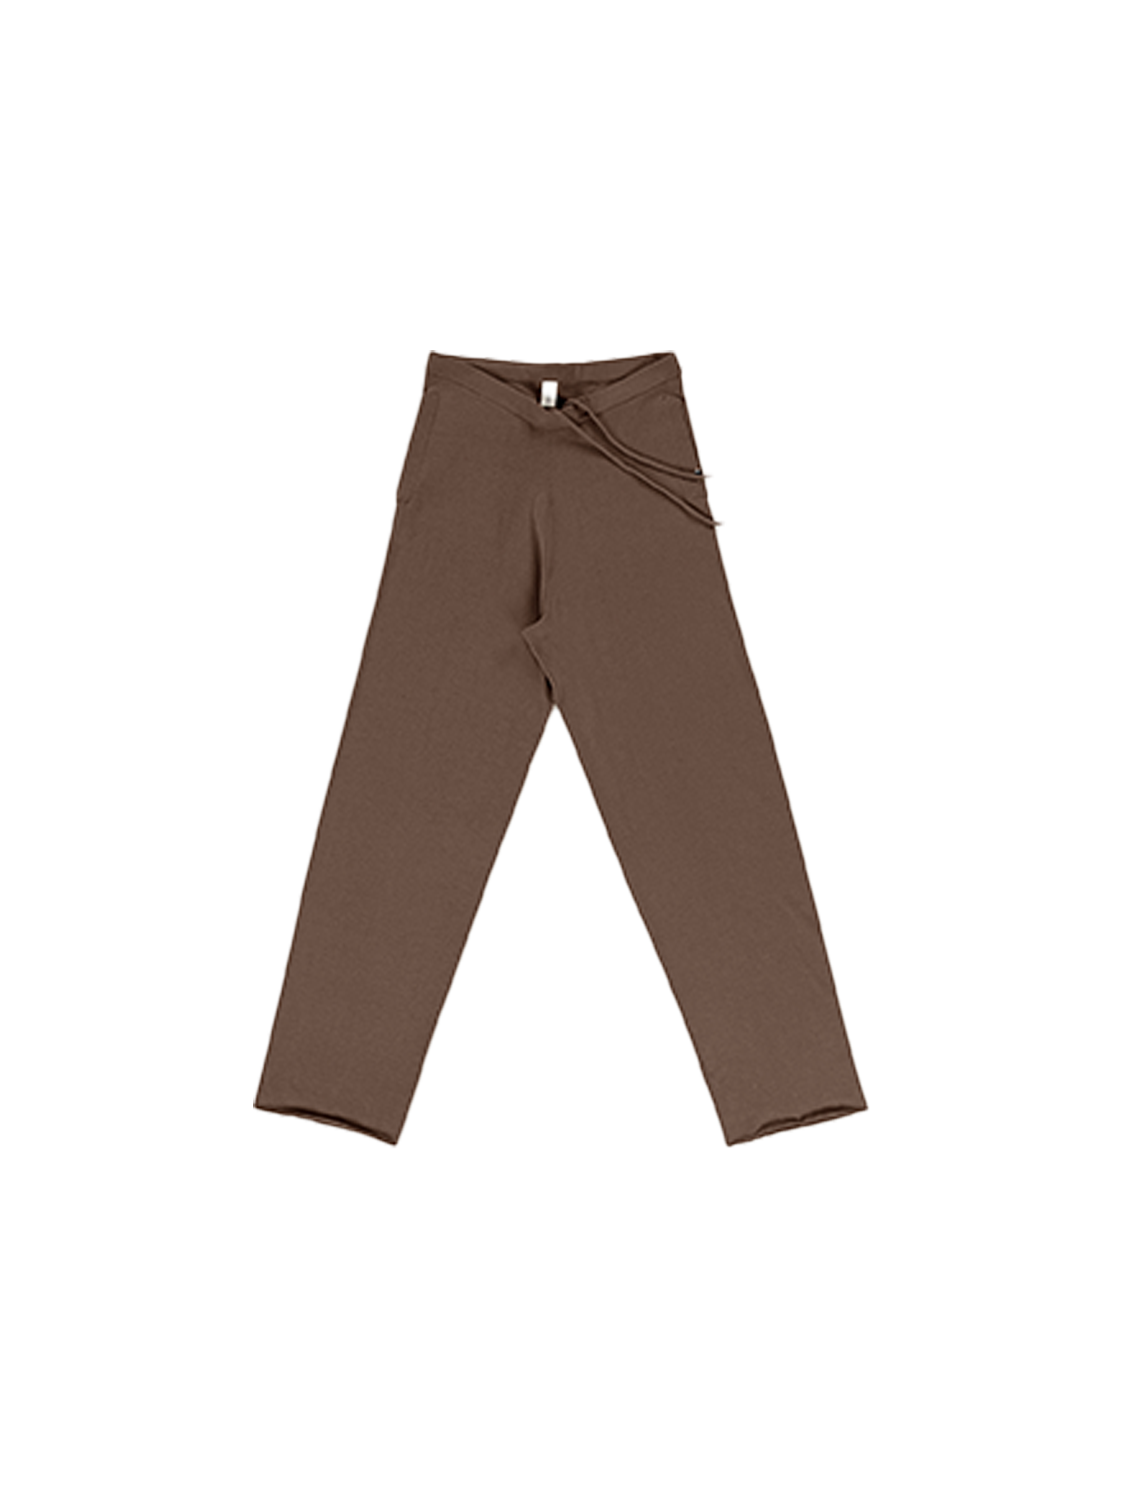 N°353 – Trousers made from a cotton-cashmere mix 